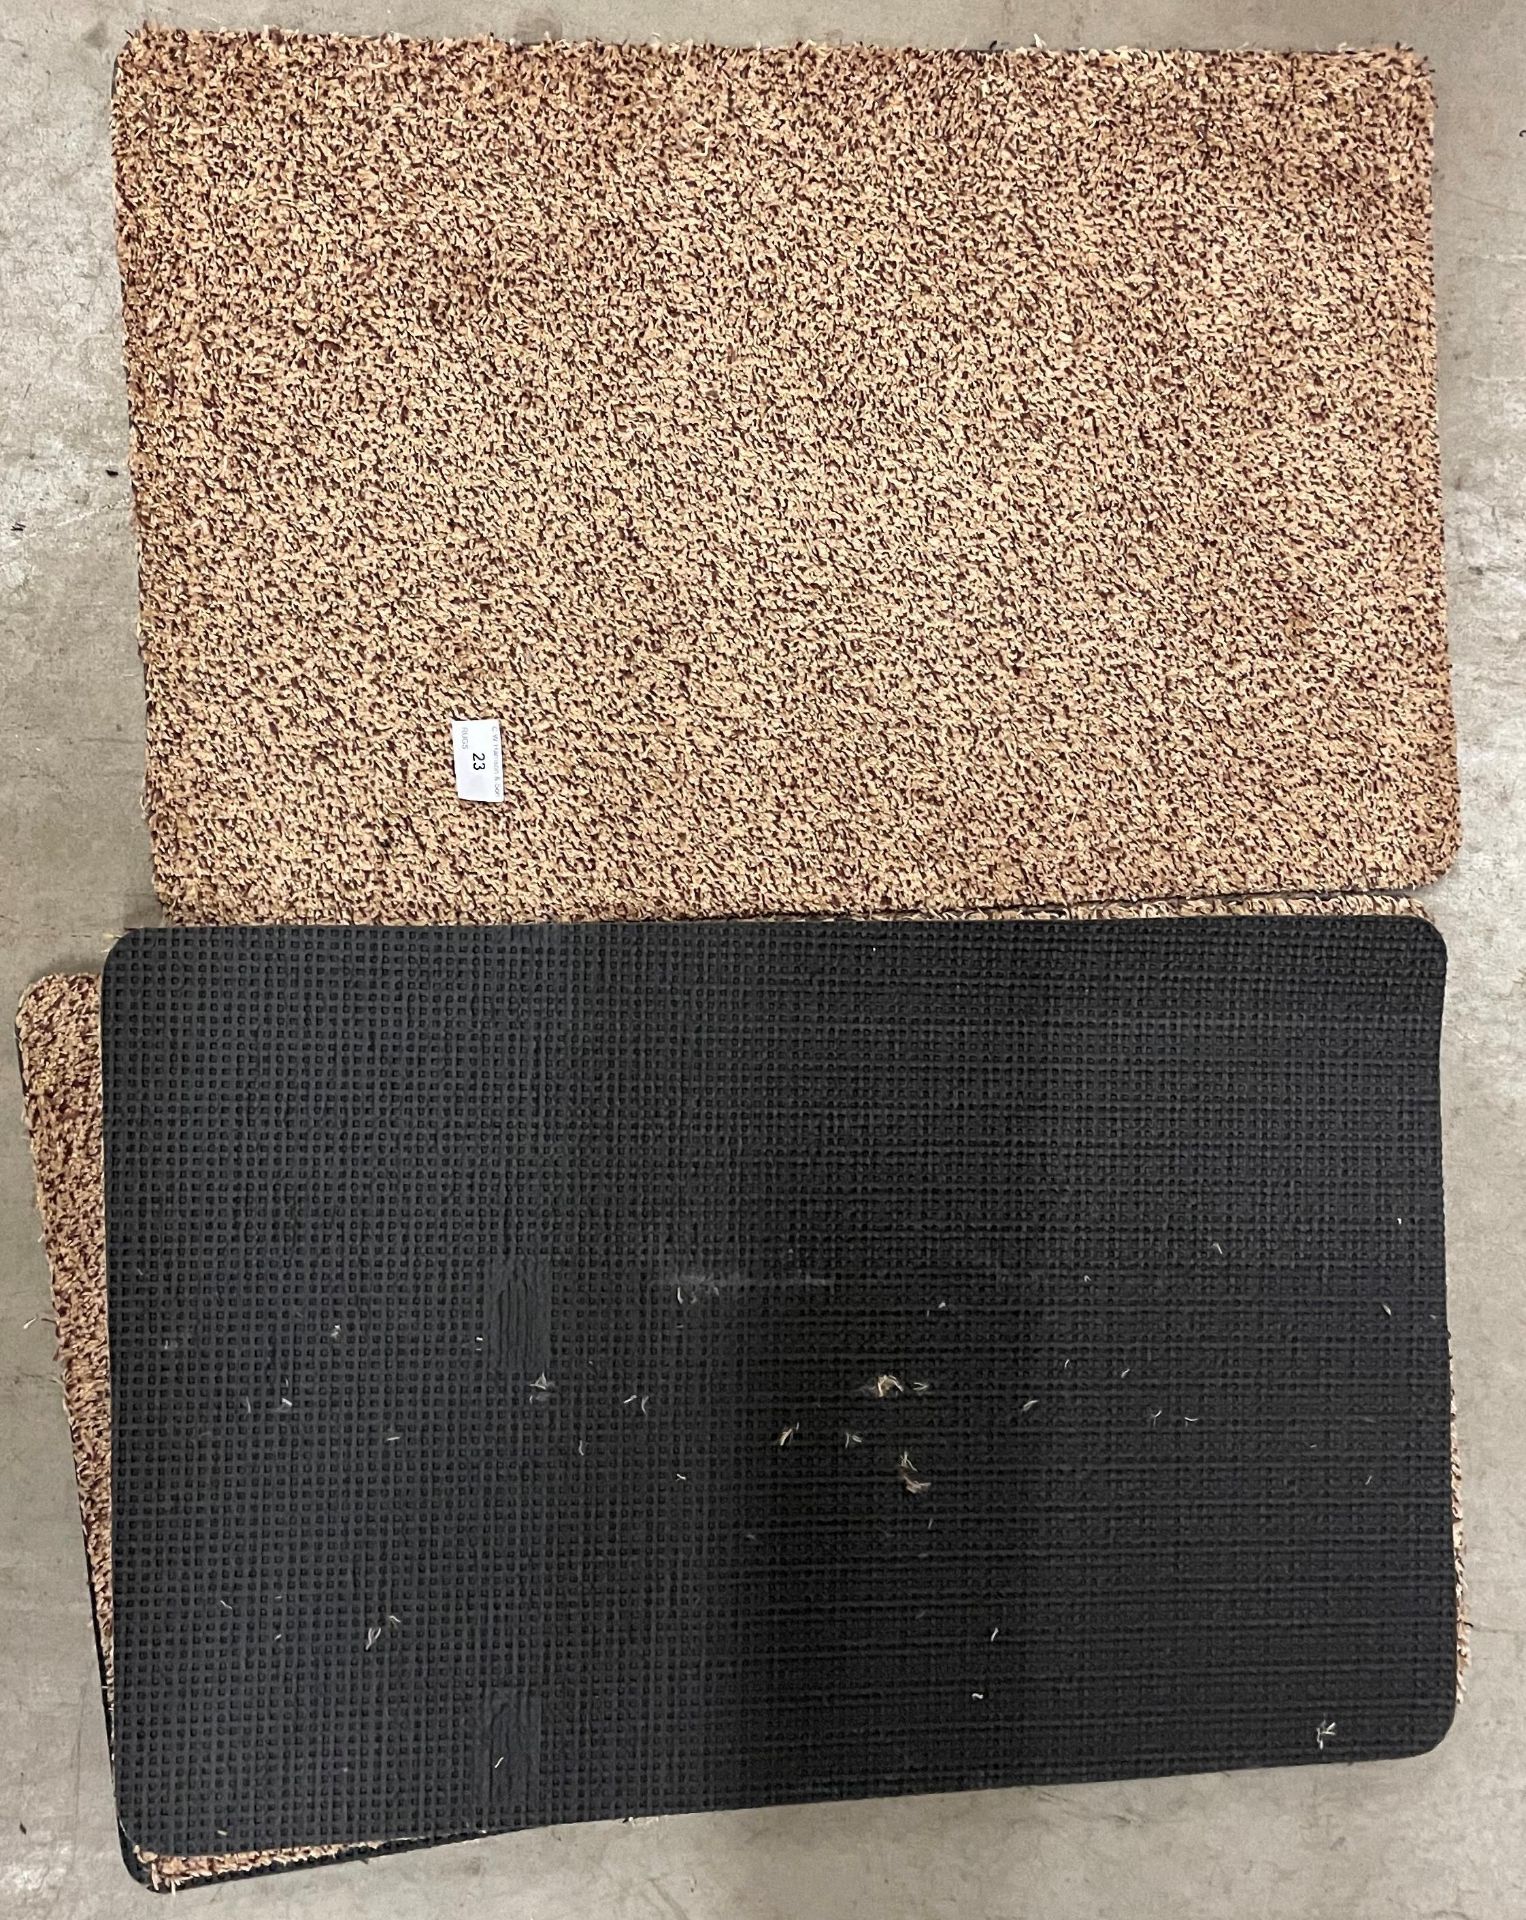 20 x brown speckled rubber backed mats - 60 x 40cm